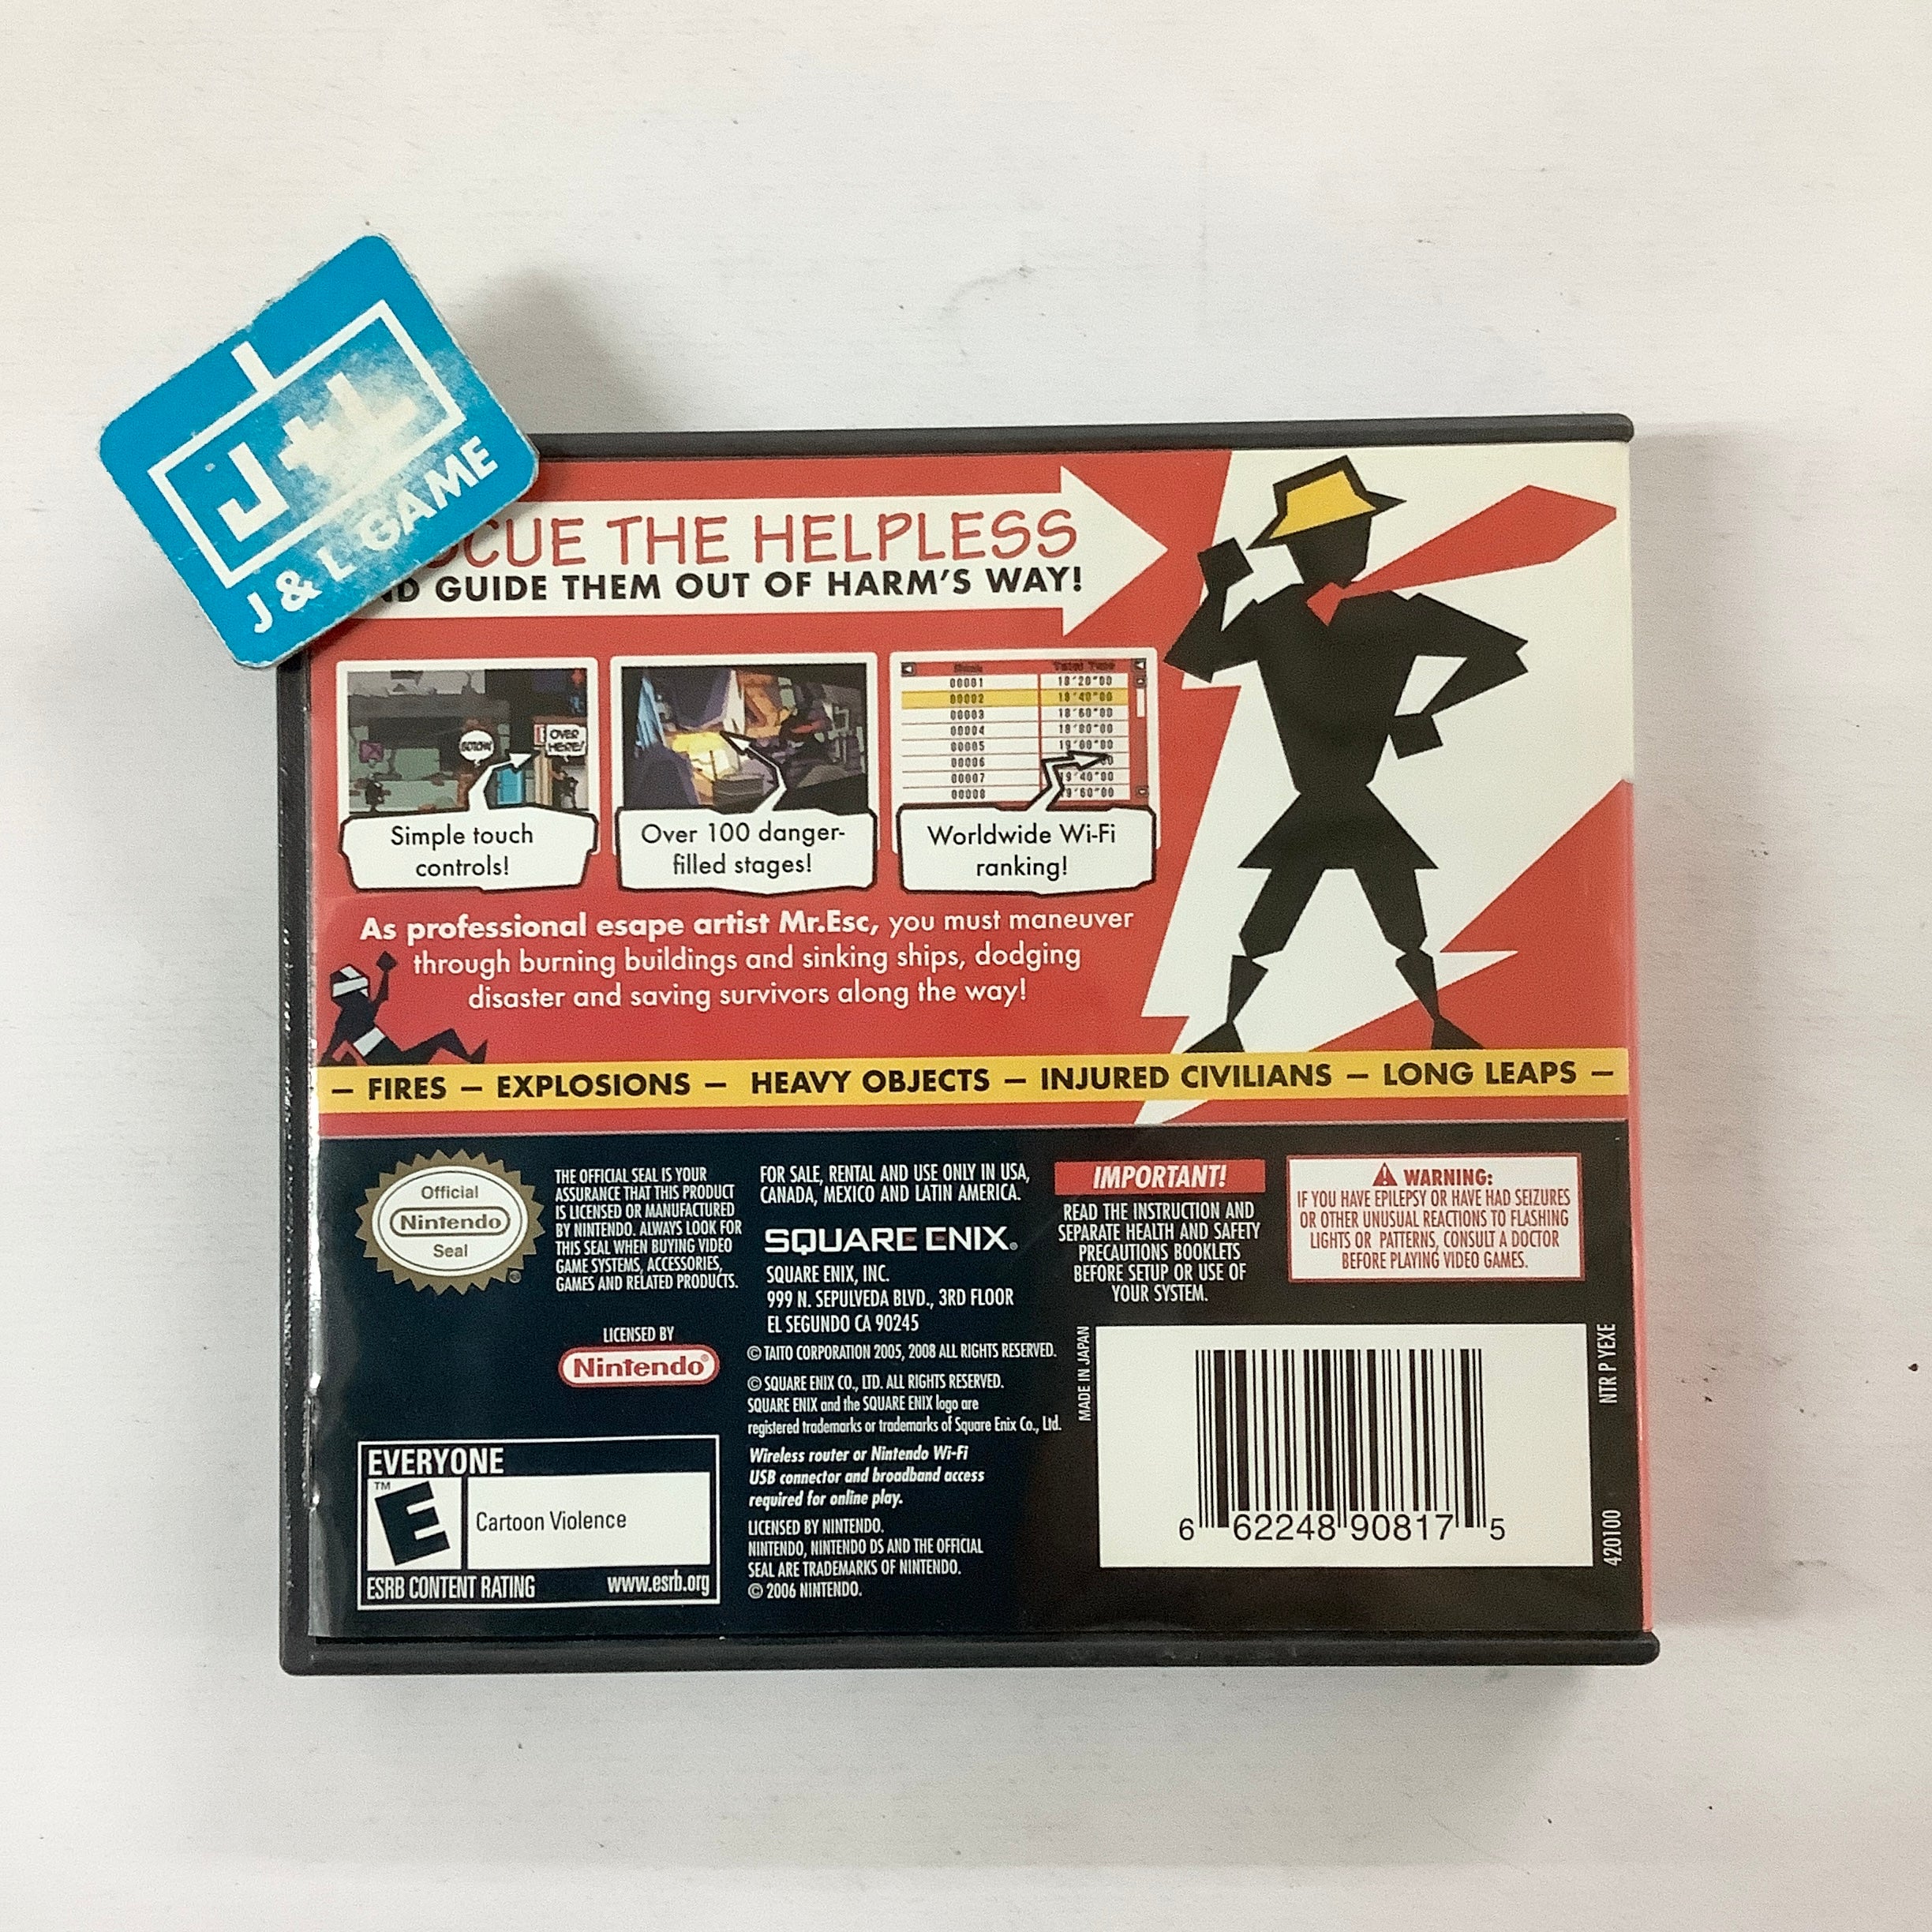 Exit DS - (NDS) Nintendo DS [Pre-Owned] Video Games Square Enix   